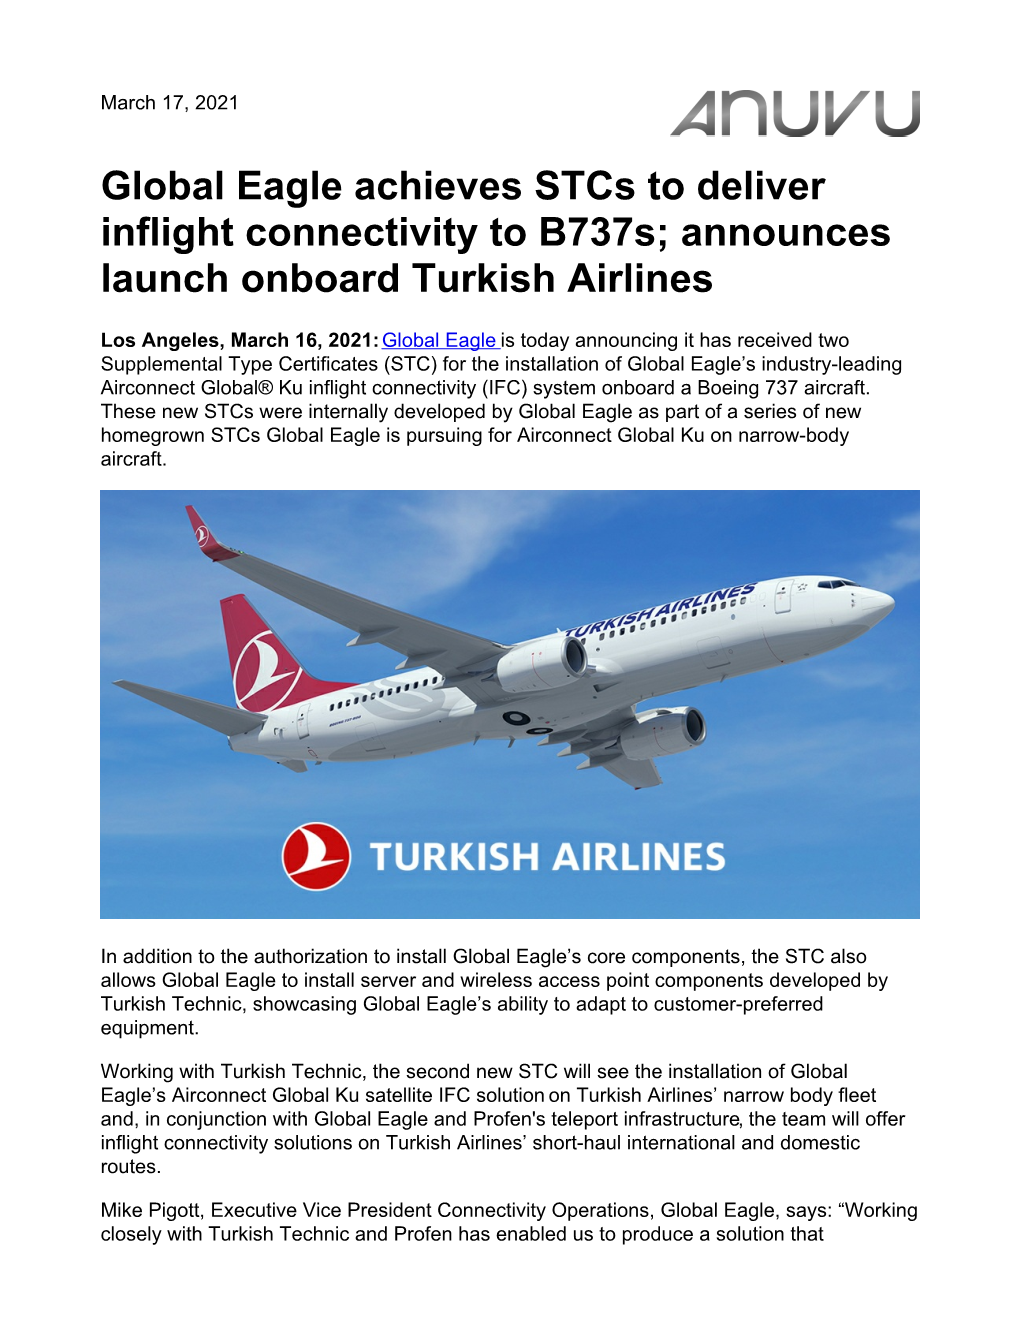 Global Eagle Achieves Stcs to Deliver Inflight Connectivity to B737s; Announces Launch Onboard Turkish Airlines